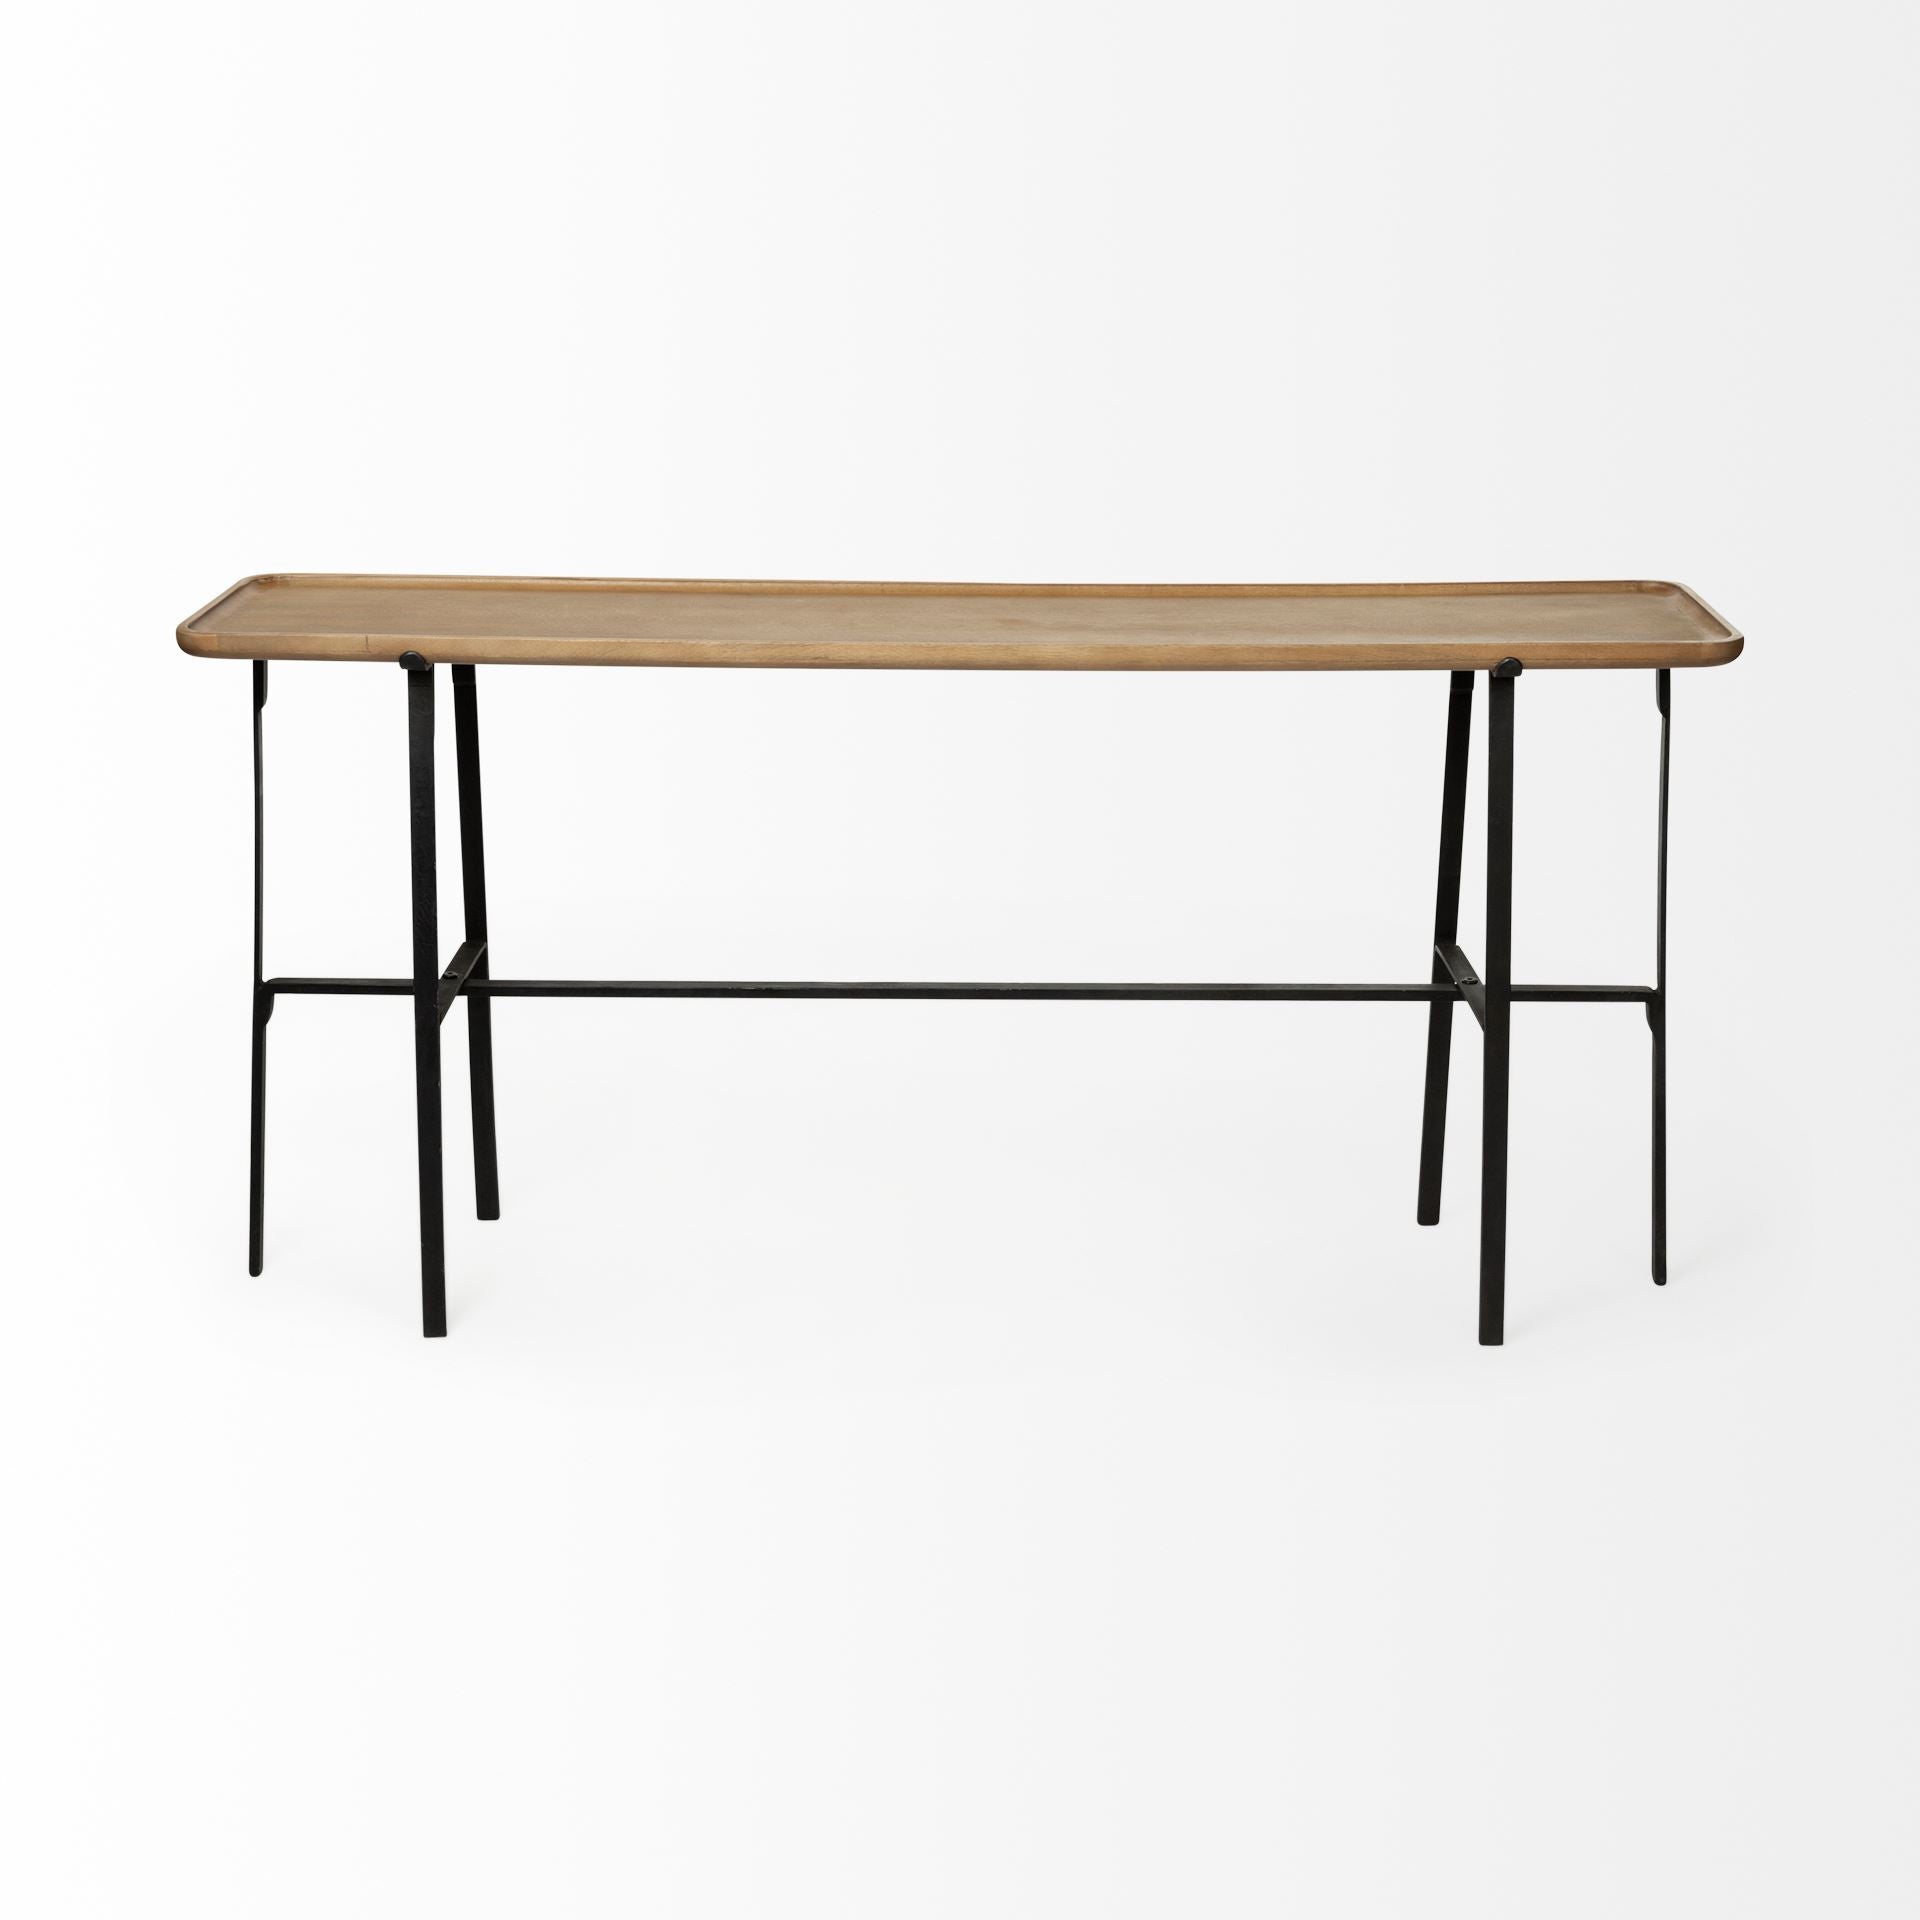 Rectangular Light Brown Raised Edge Mango Wood Finish Console Table With Black Metal Frame And Base